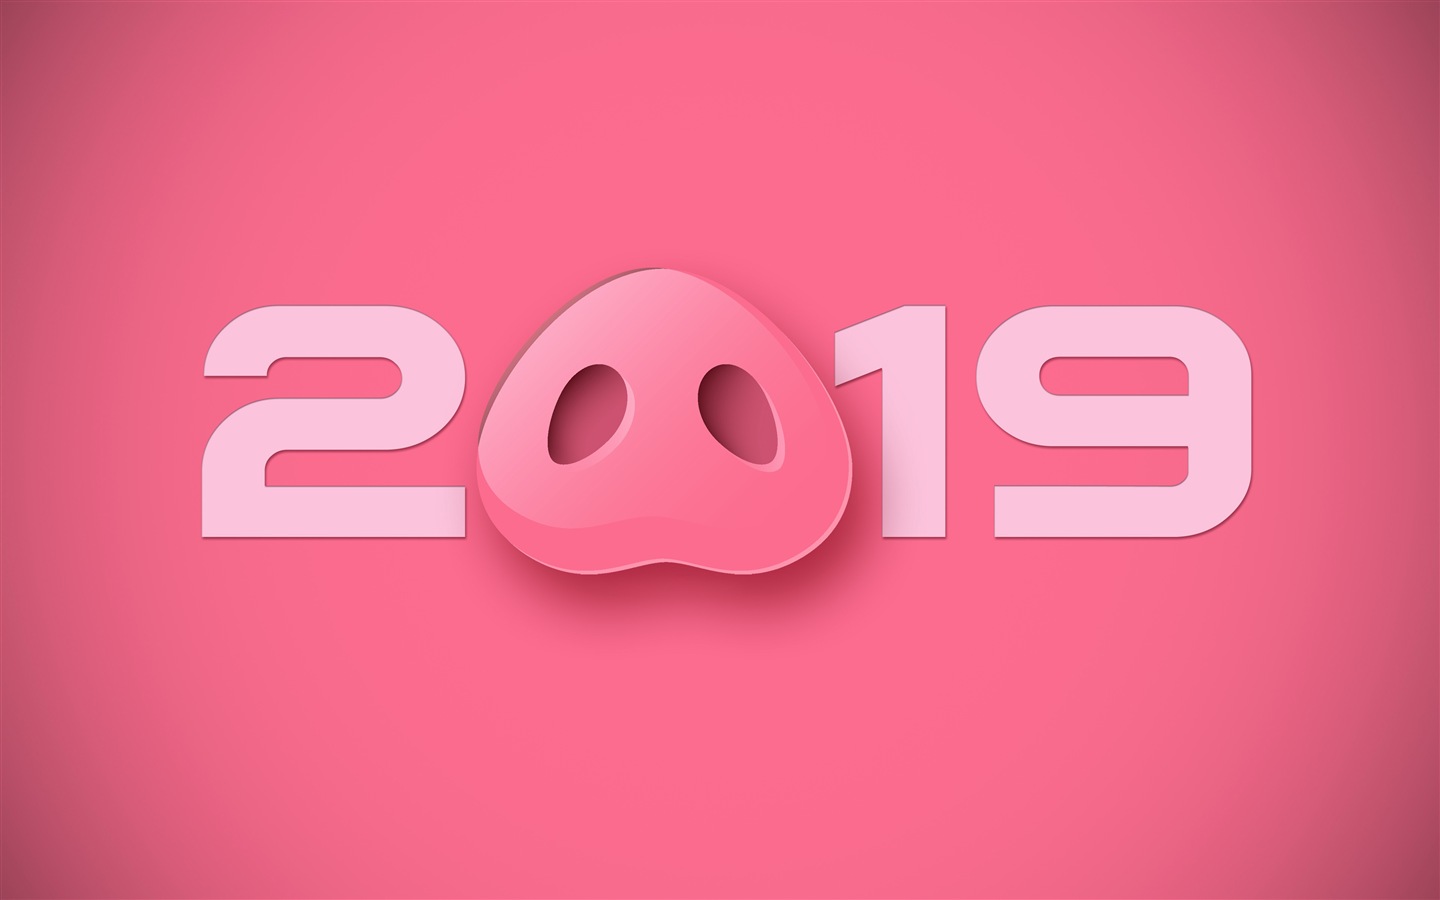 Happy New Year 2019 HD wallpapers #14 - 1440x900